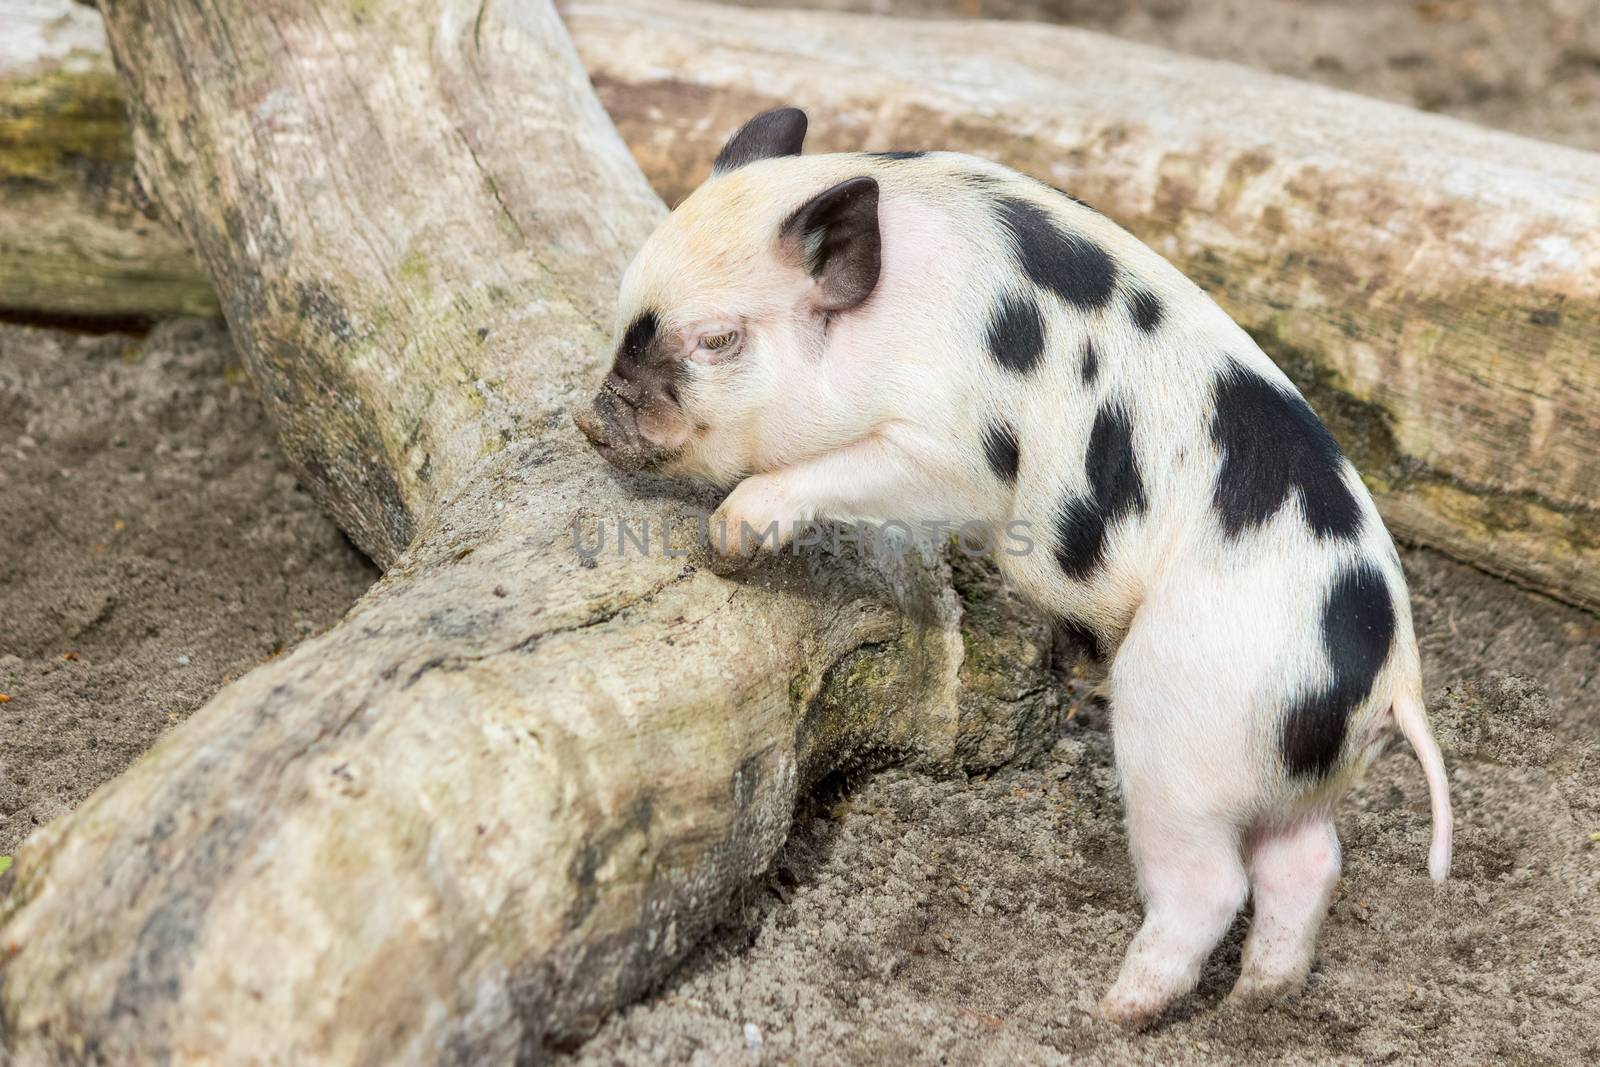 Young black and white piglet at tree trunk  by BenSchonewille